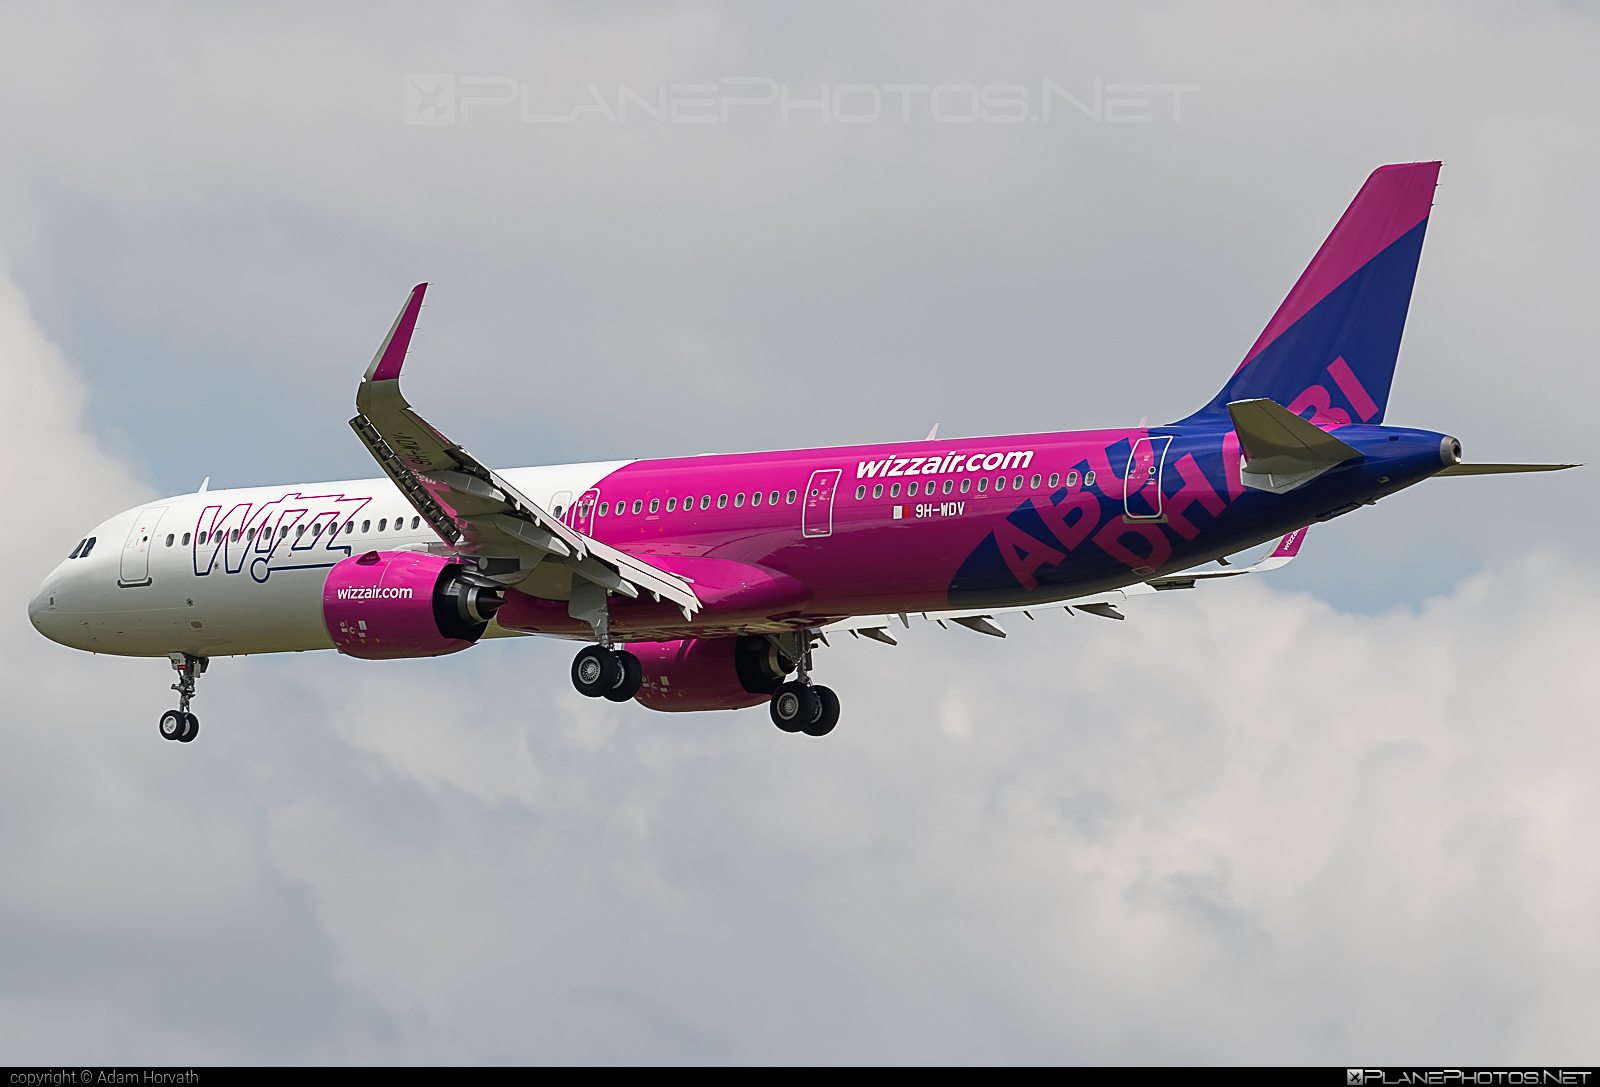 Airbus A321-271NX - 9H-WDV operated by Wizz Air #a320family #a321 #a321neo #airbus #airbus321 #airbus321lr #wizz #wizzair